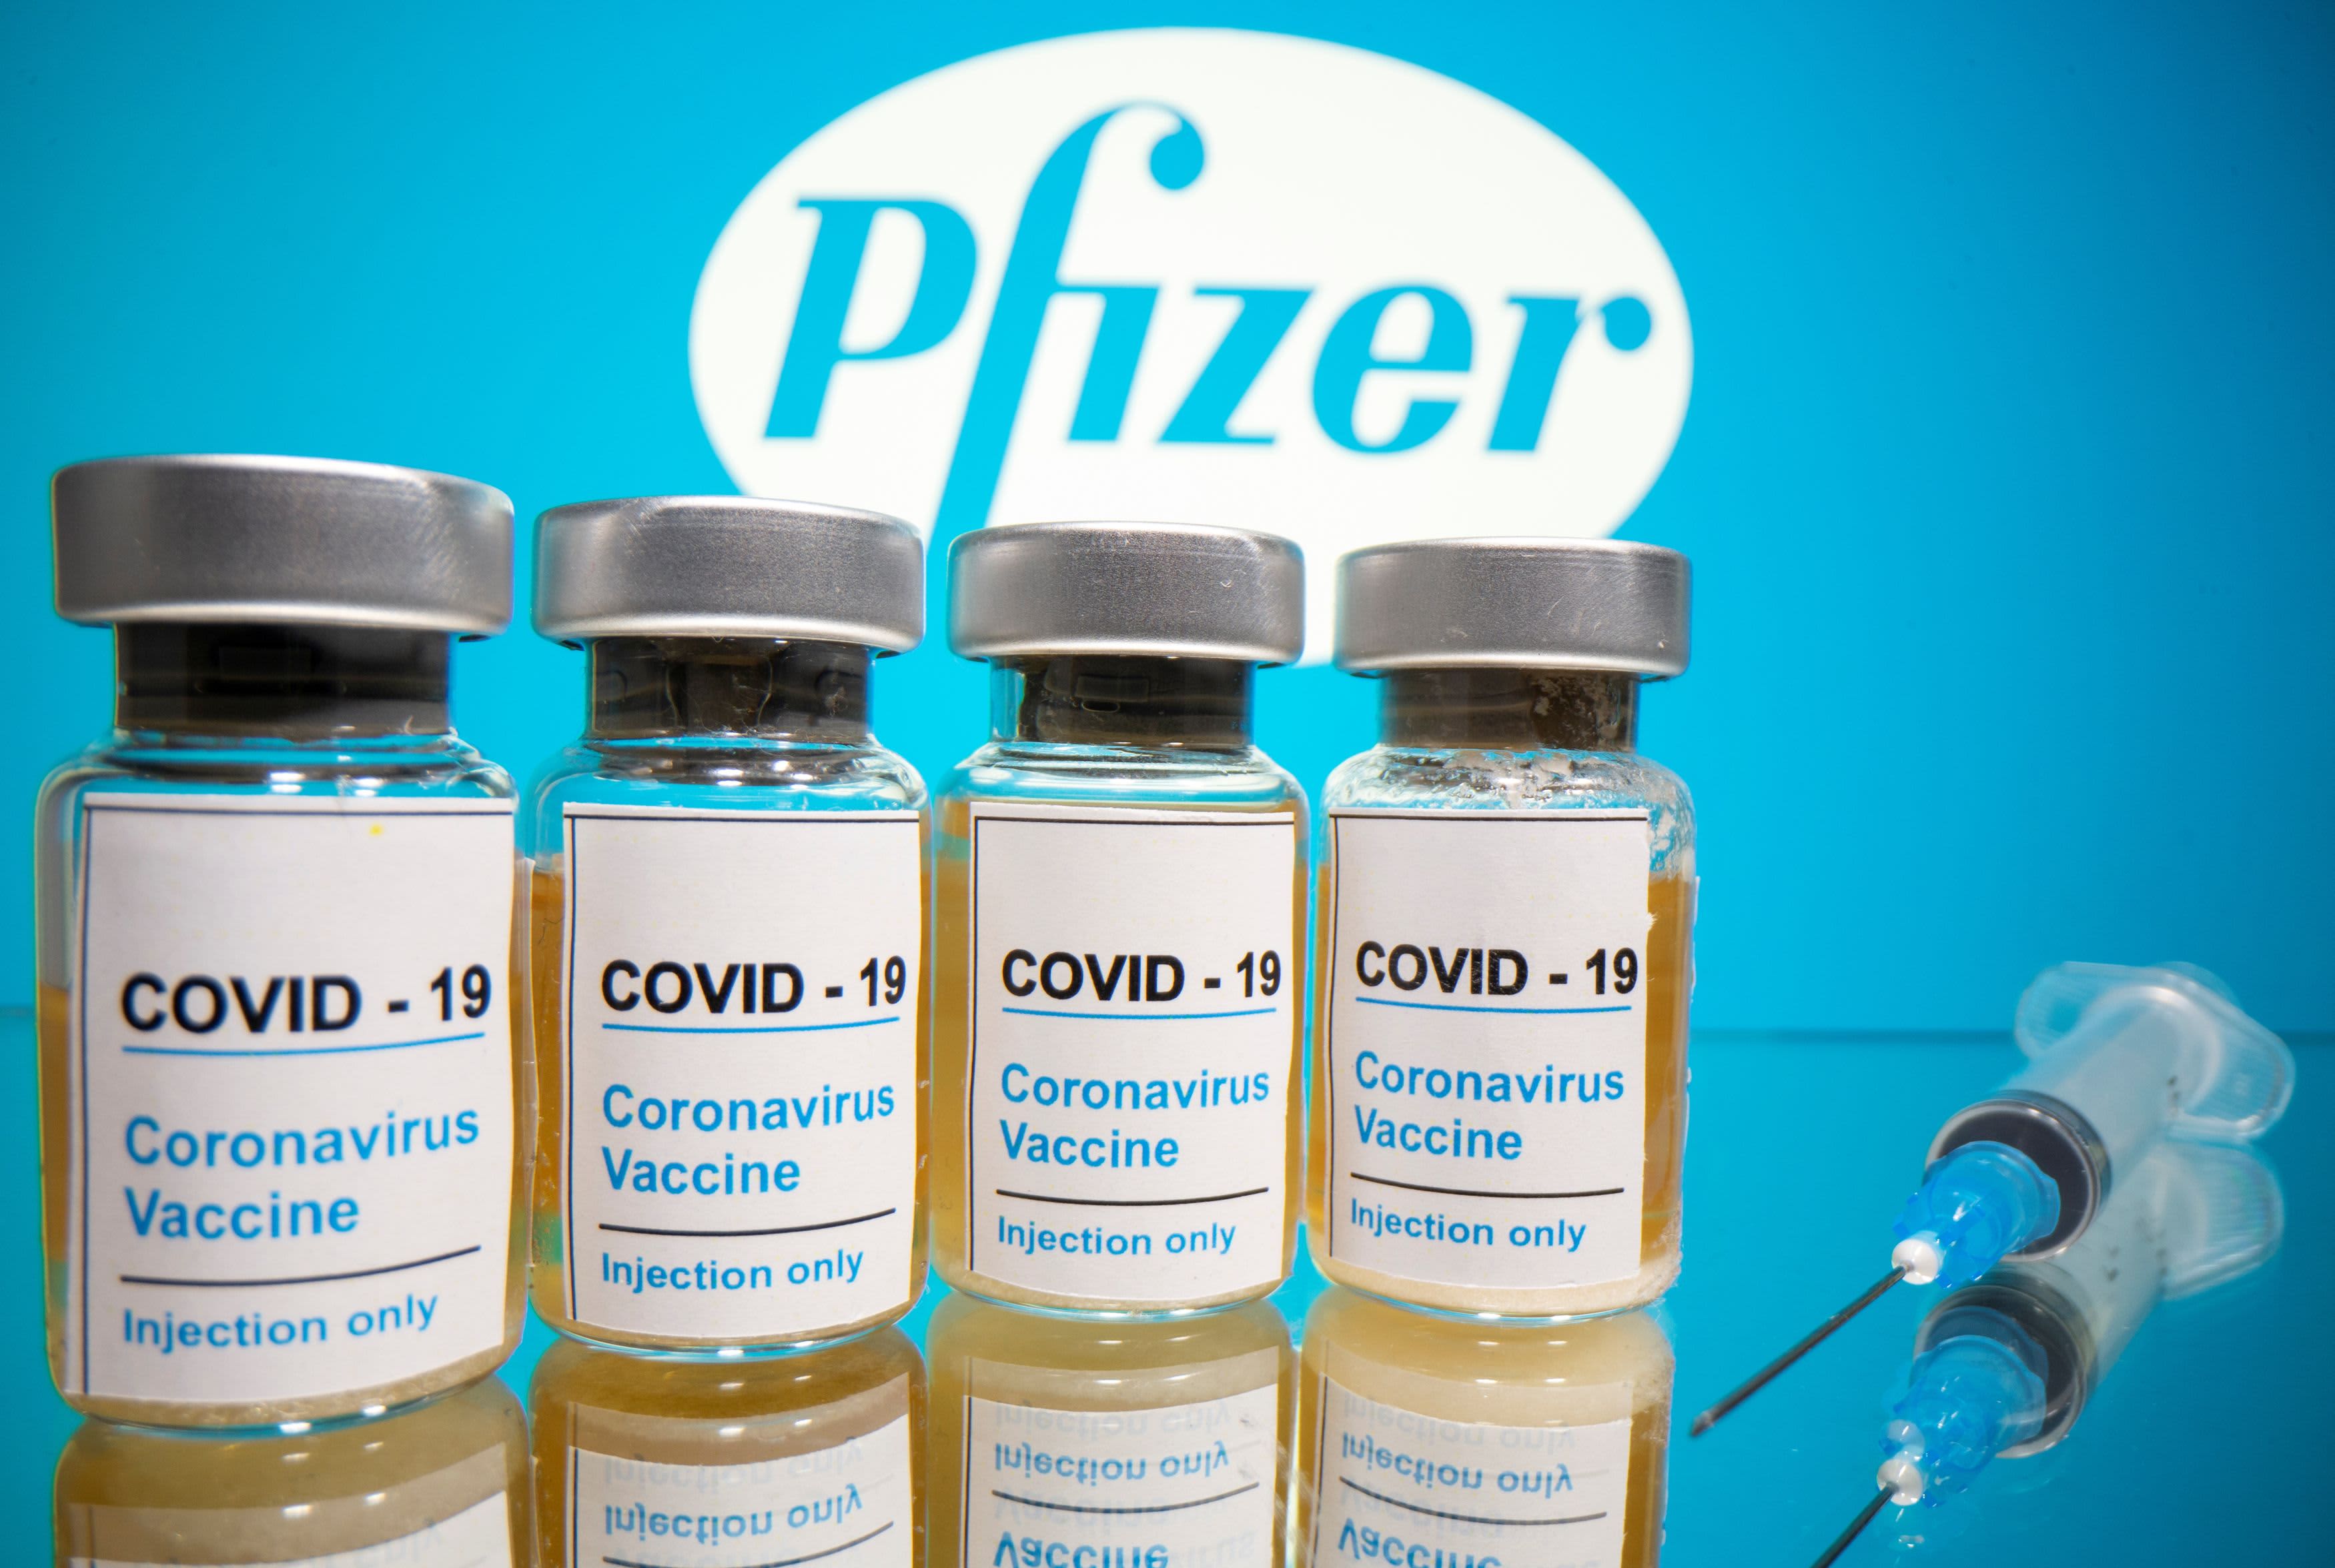 How reliable is Pfizer vaccine?